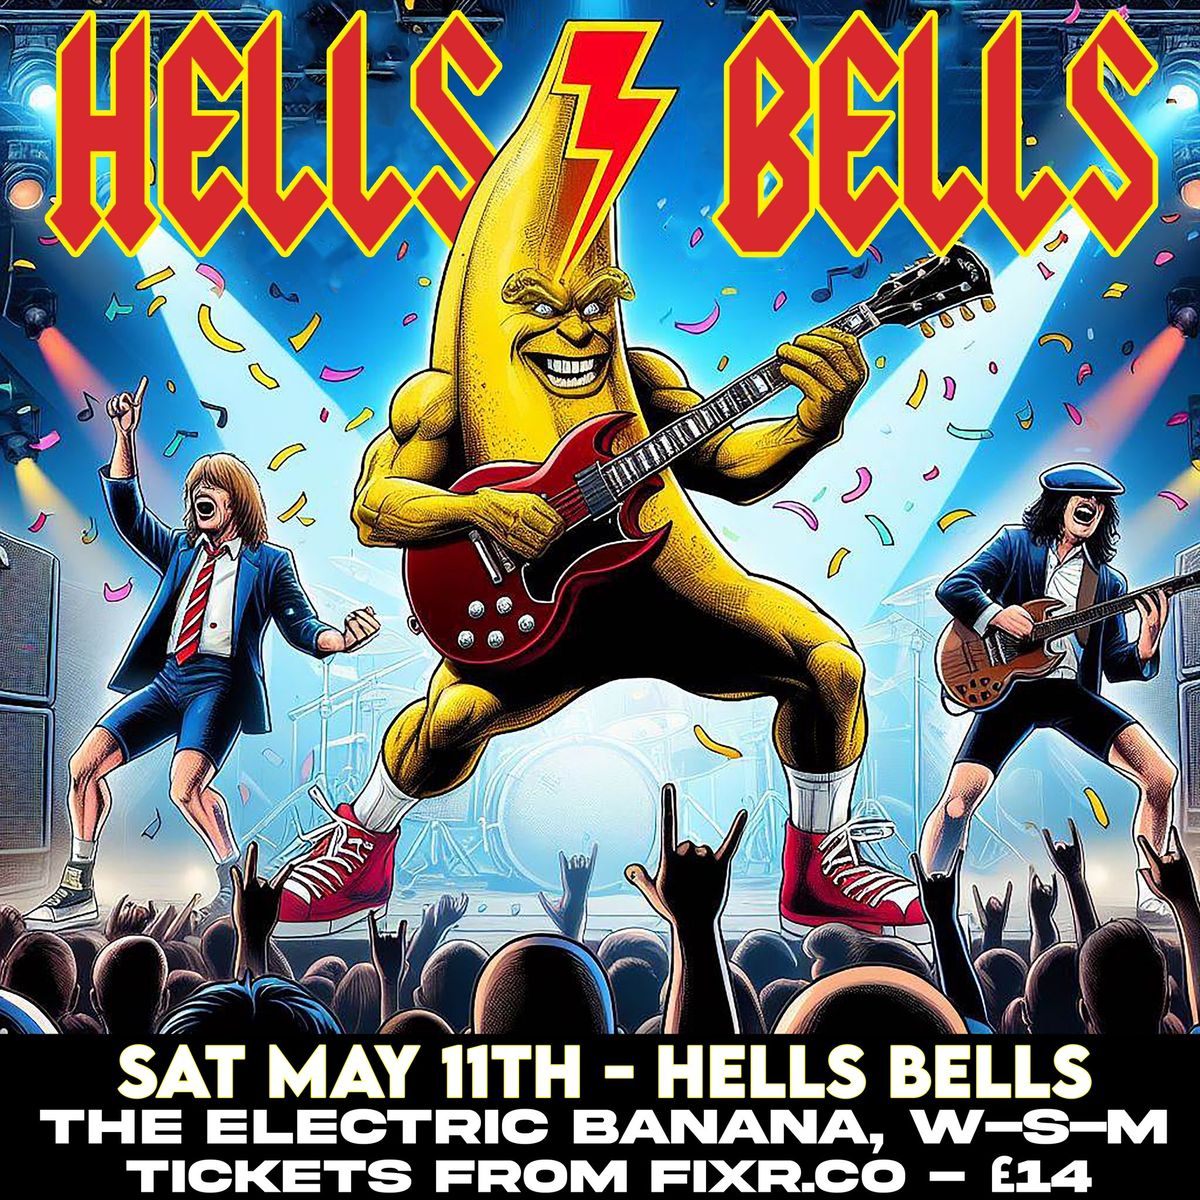 HELLS BELLS - AC DC TRIBUTE - 11TH MAY THE ELECTRIC BANANA 